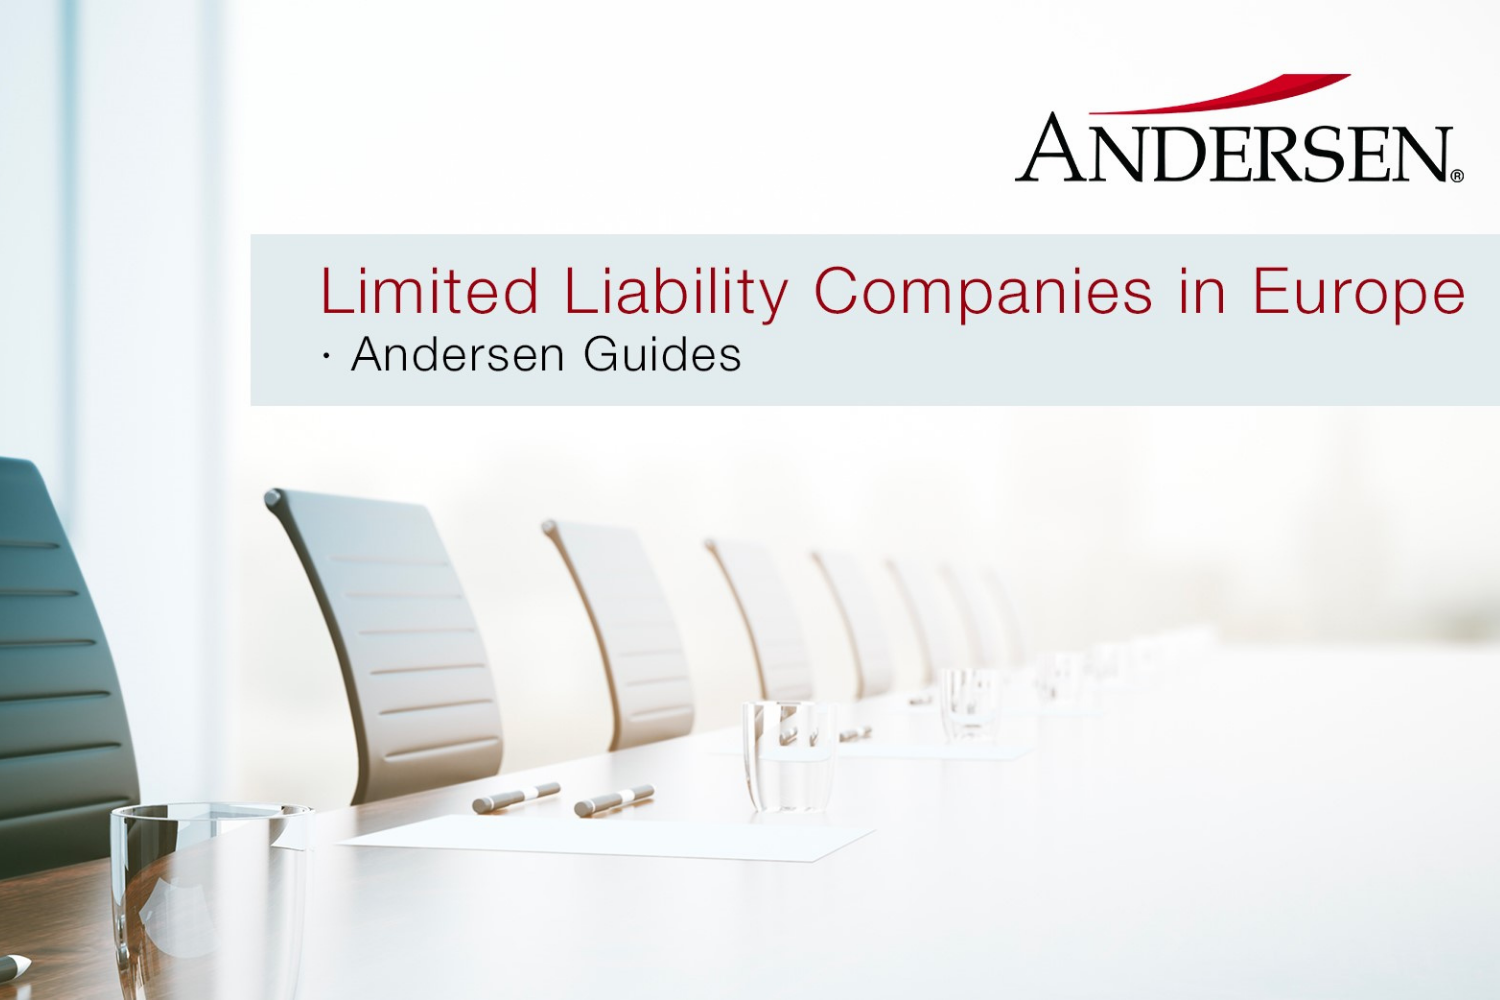 Andersen Guides: Limited Liability Companies in Europe